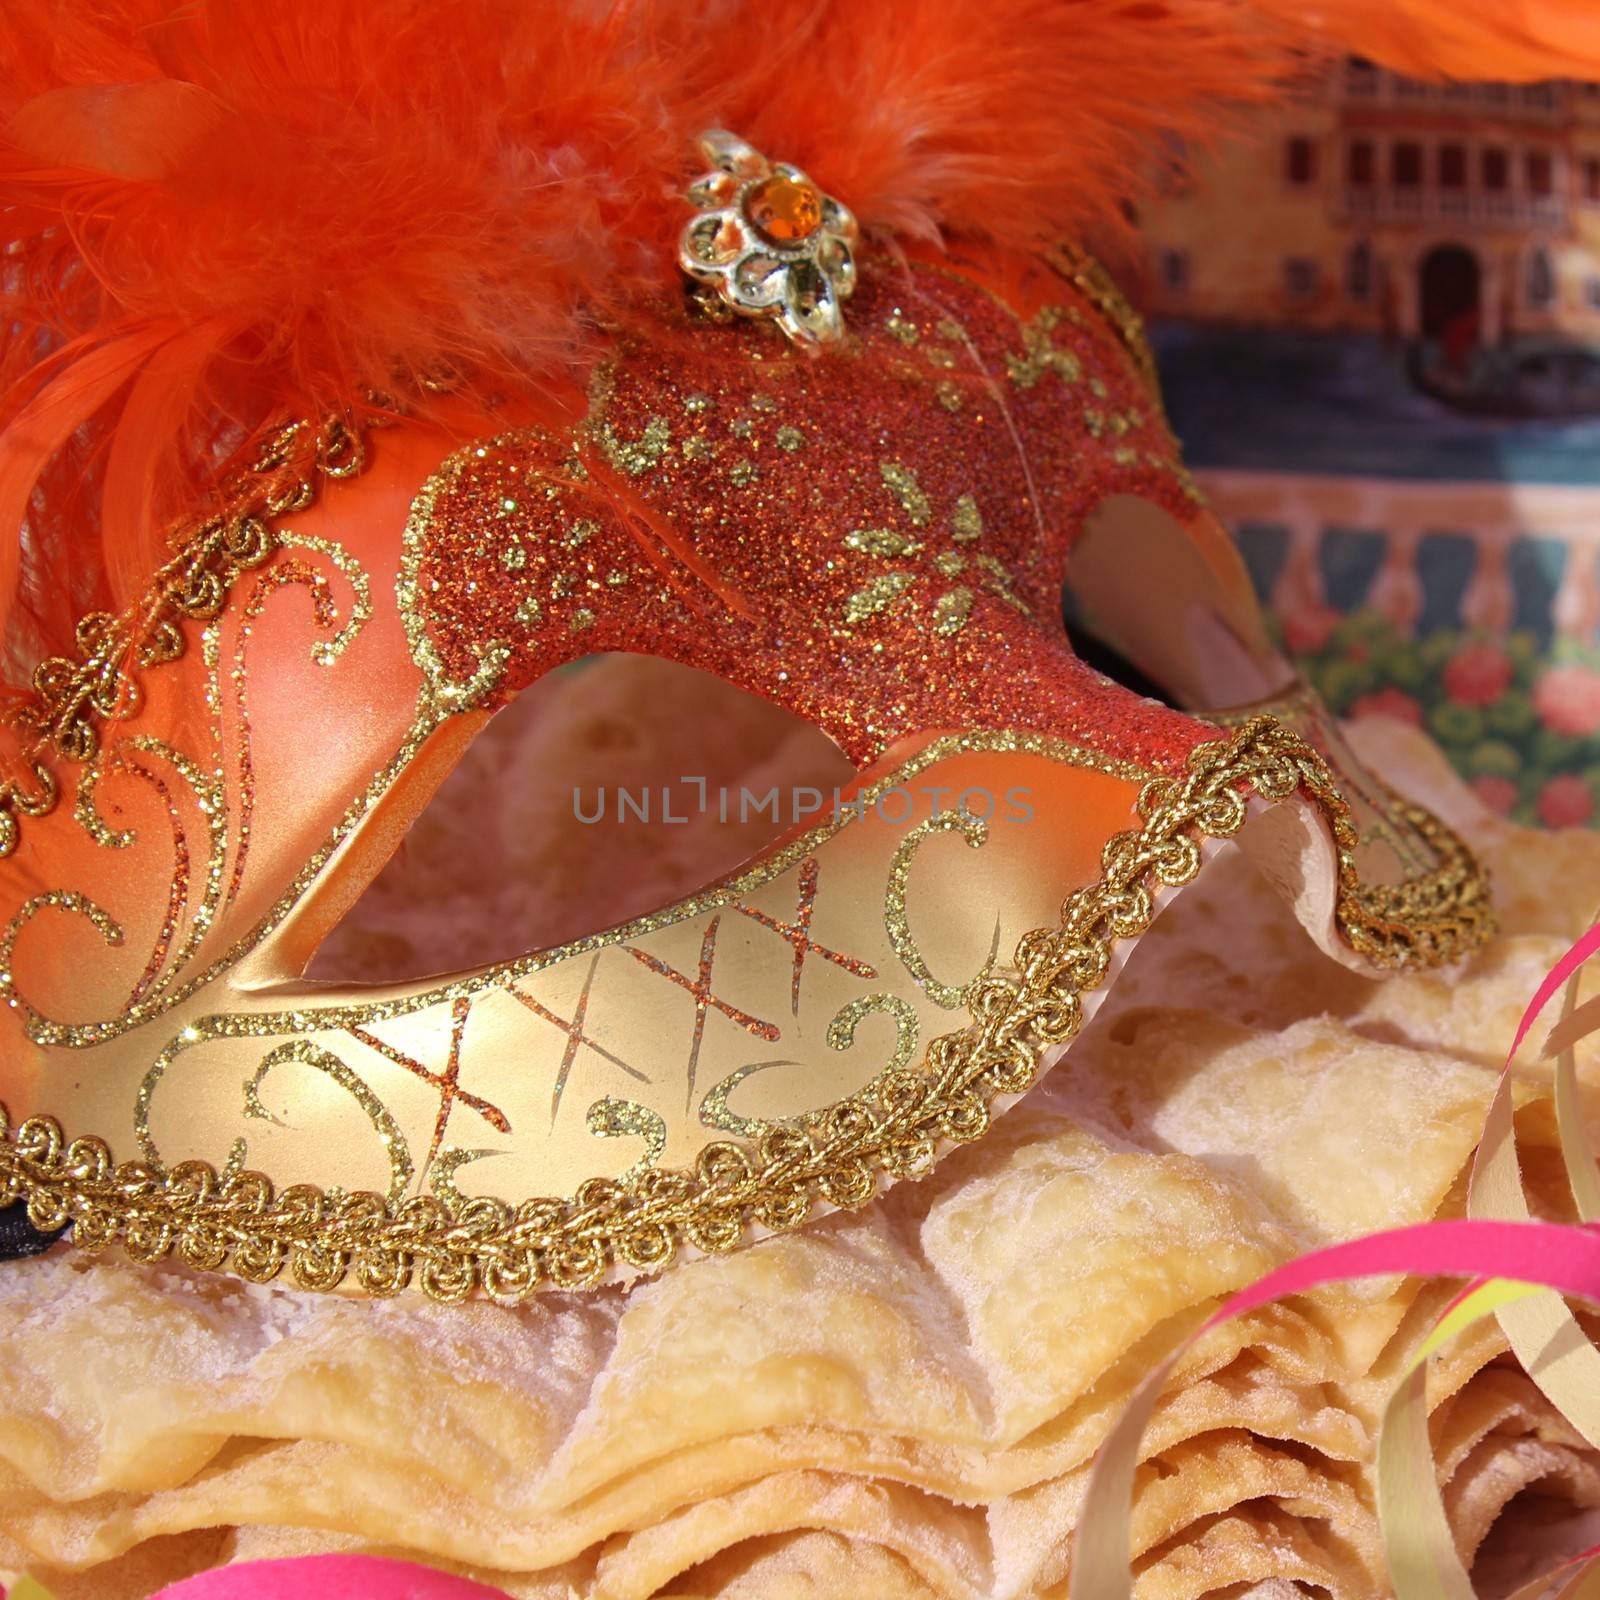 Orange carnival mask with gold with pancakes